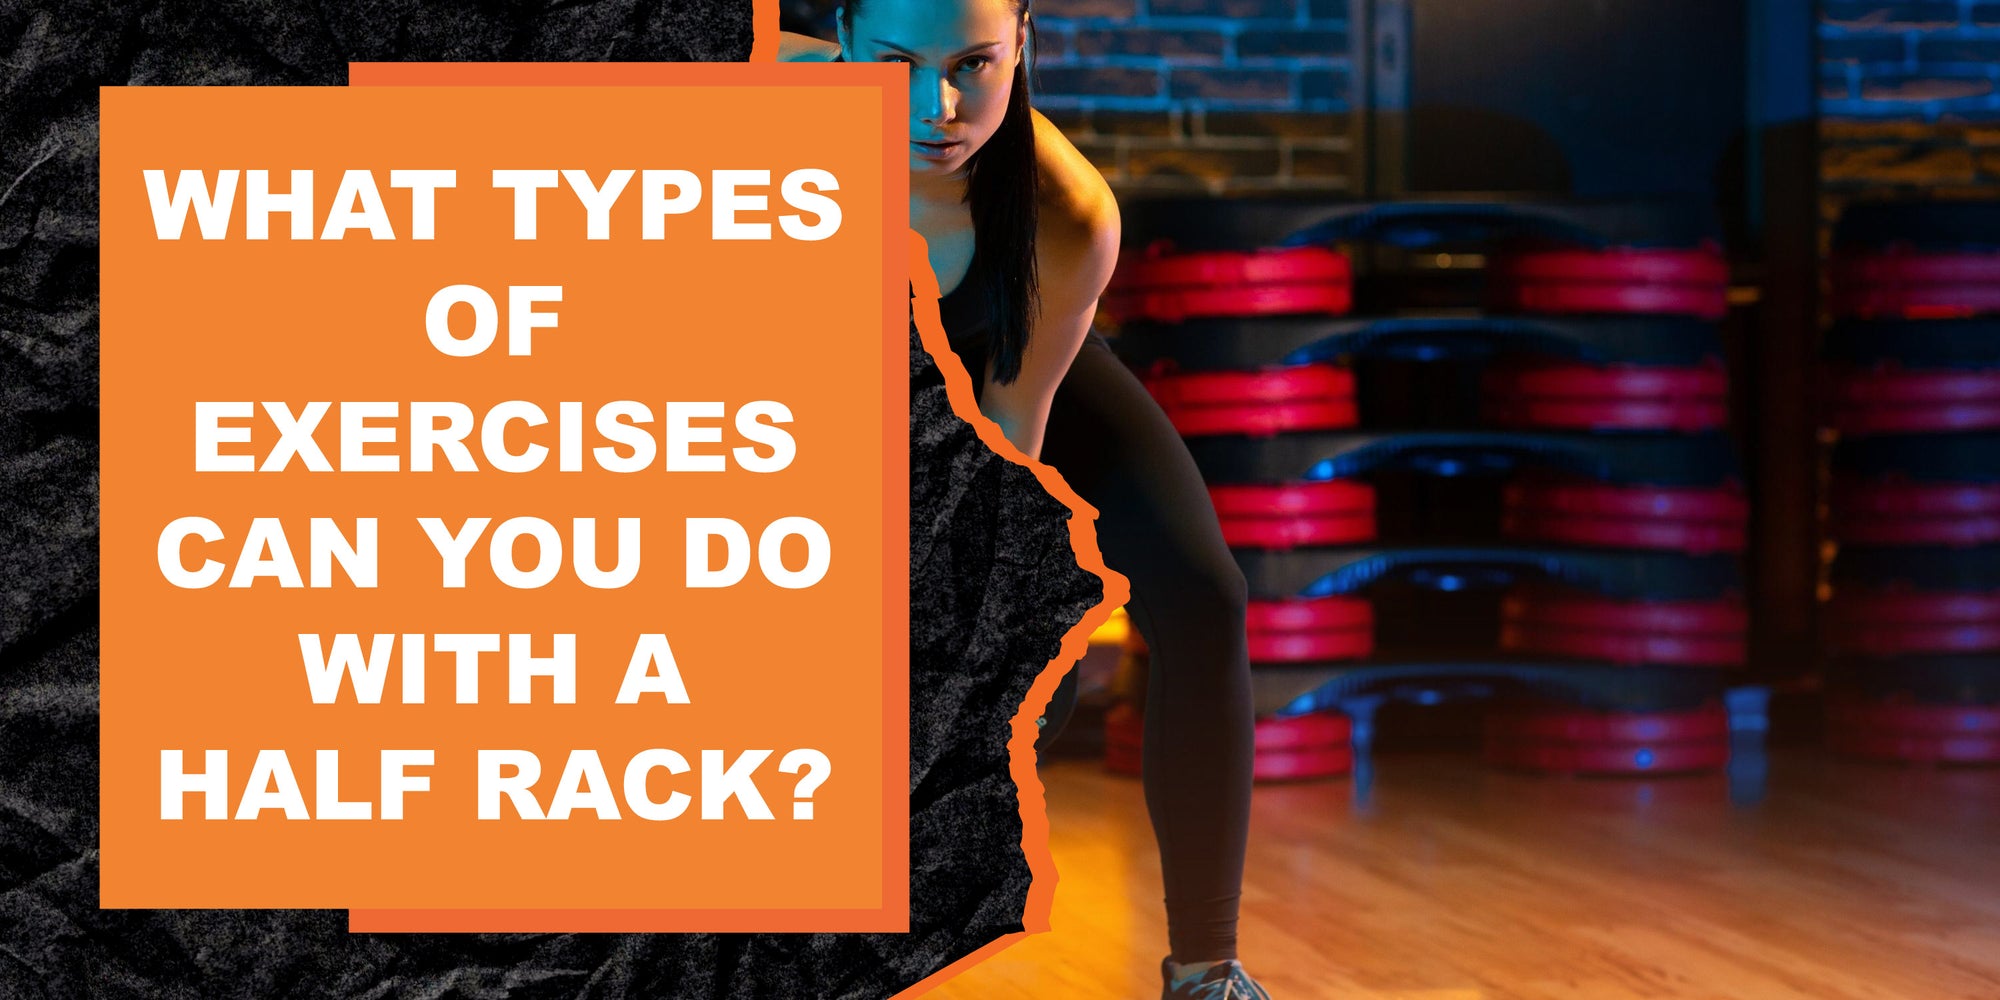 What Types of Exercises Can You Do With a Half Rack?